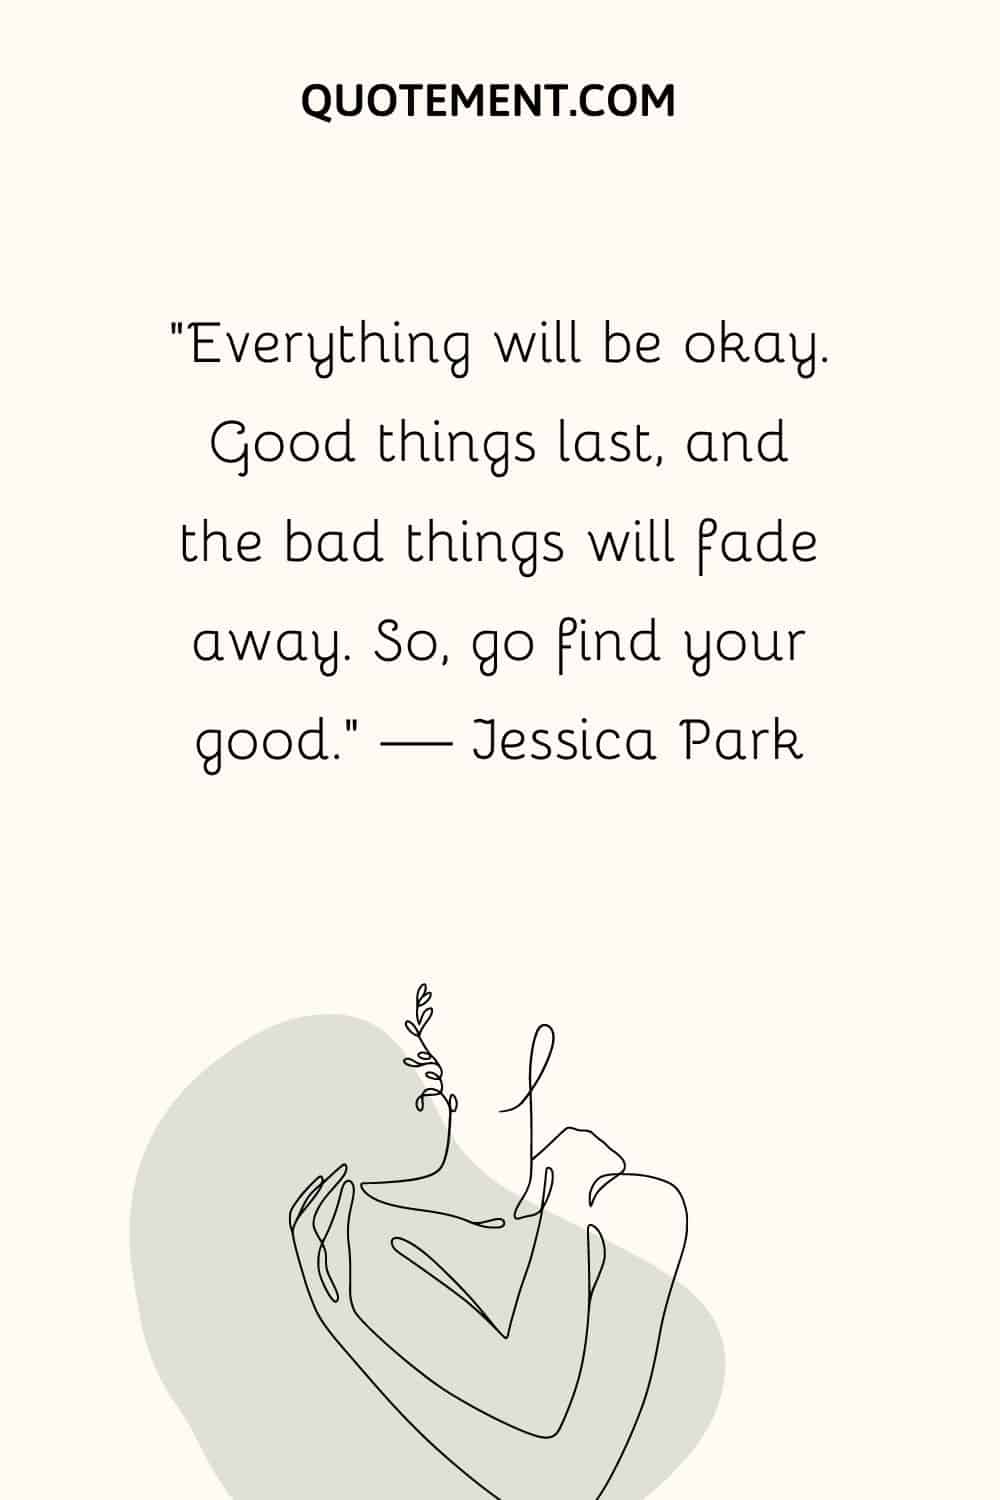 “Everything will be okay. Good things last, and the bad things will fade away. So, go find your good.” — Jessica Park